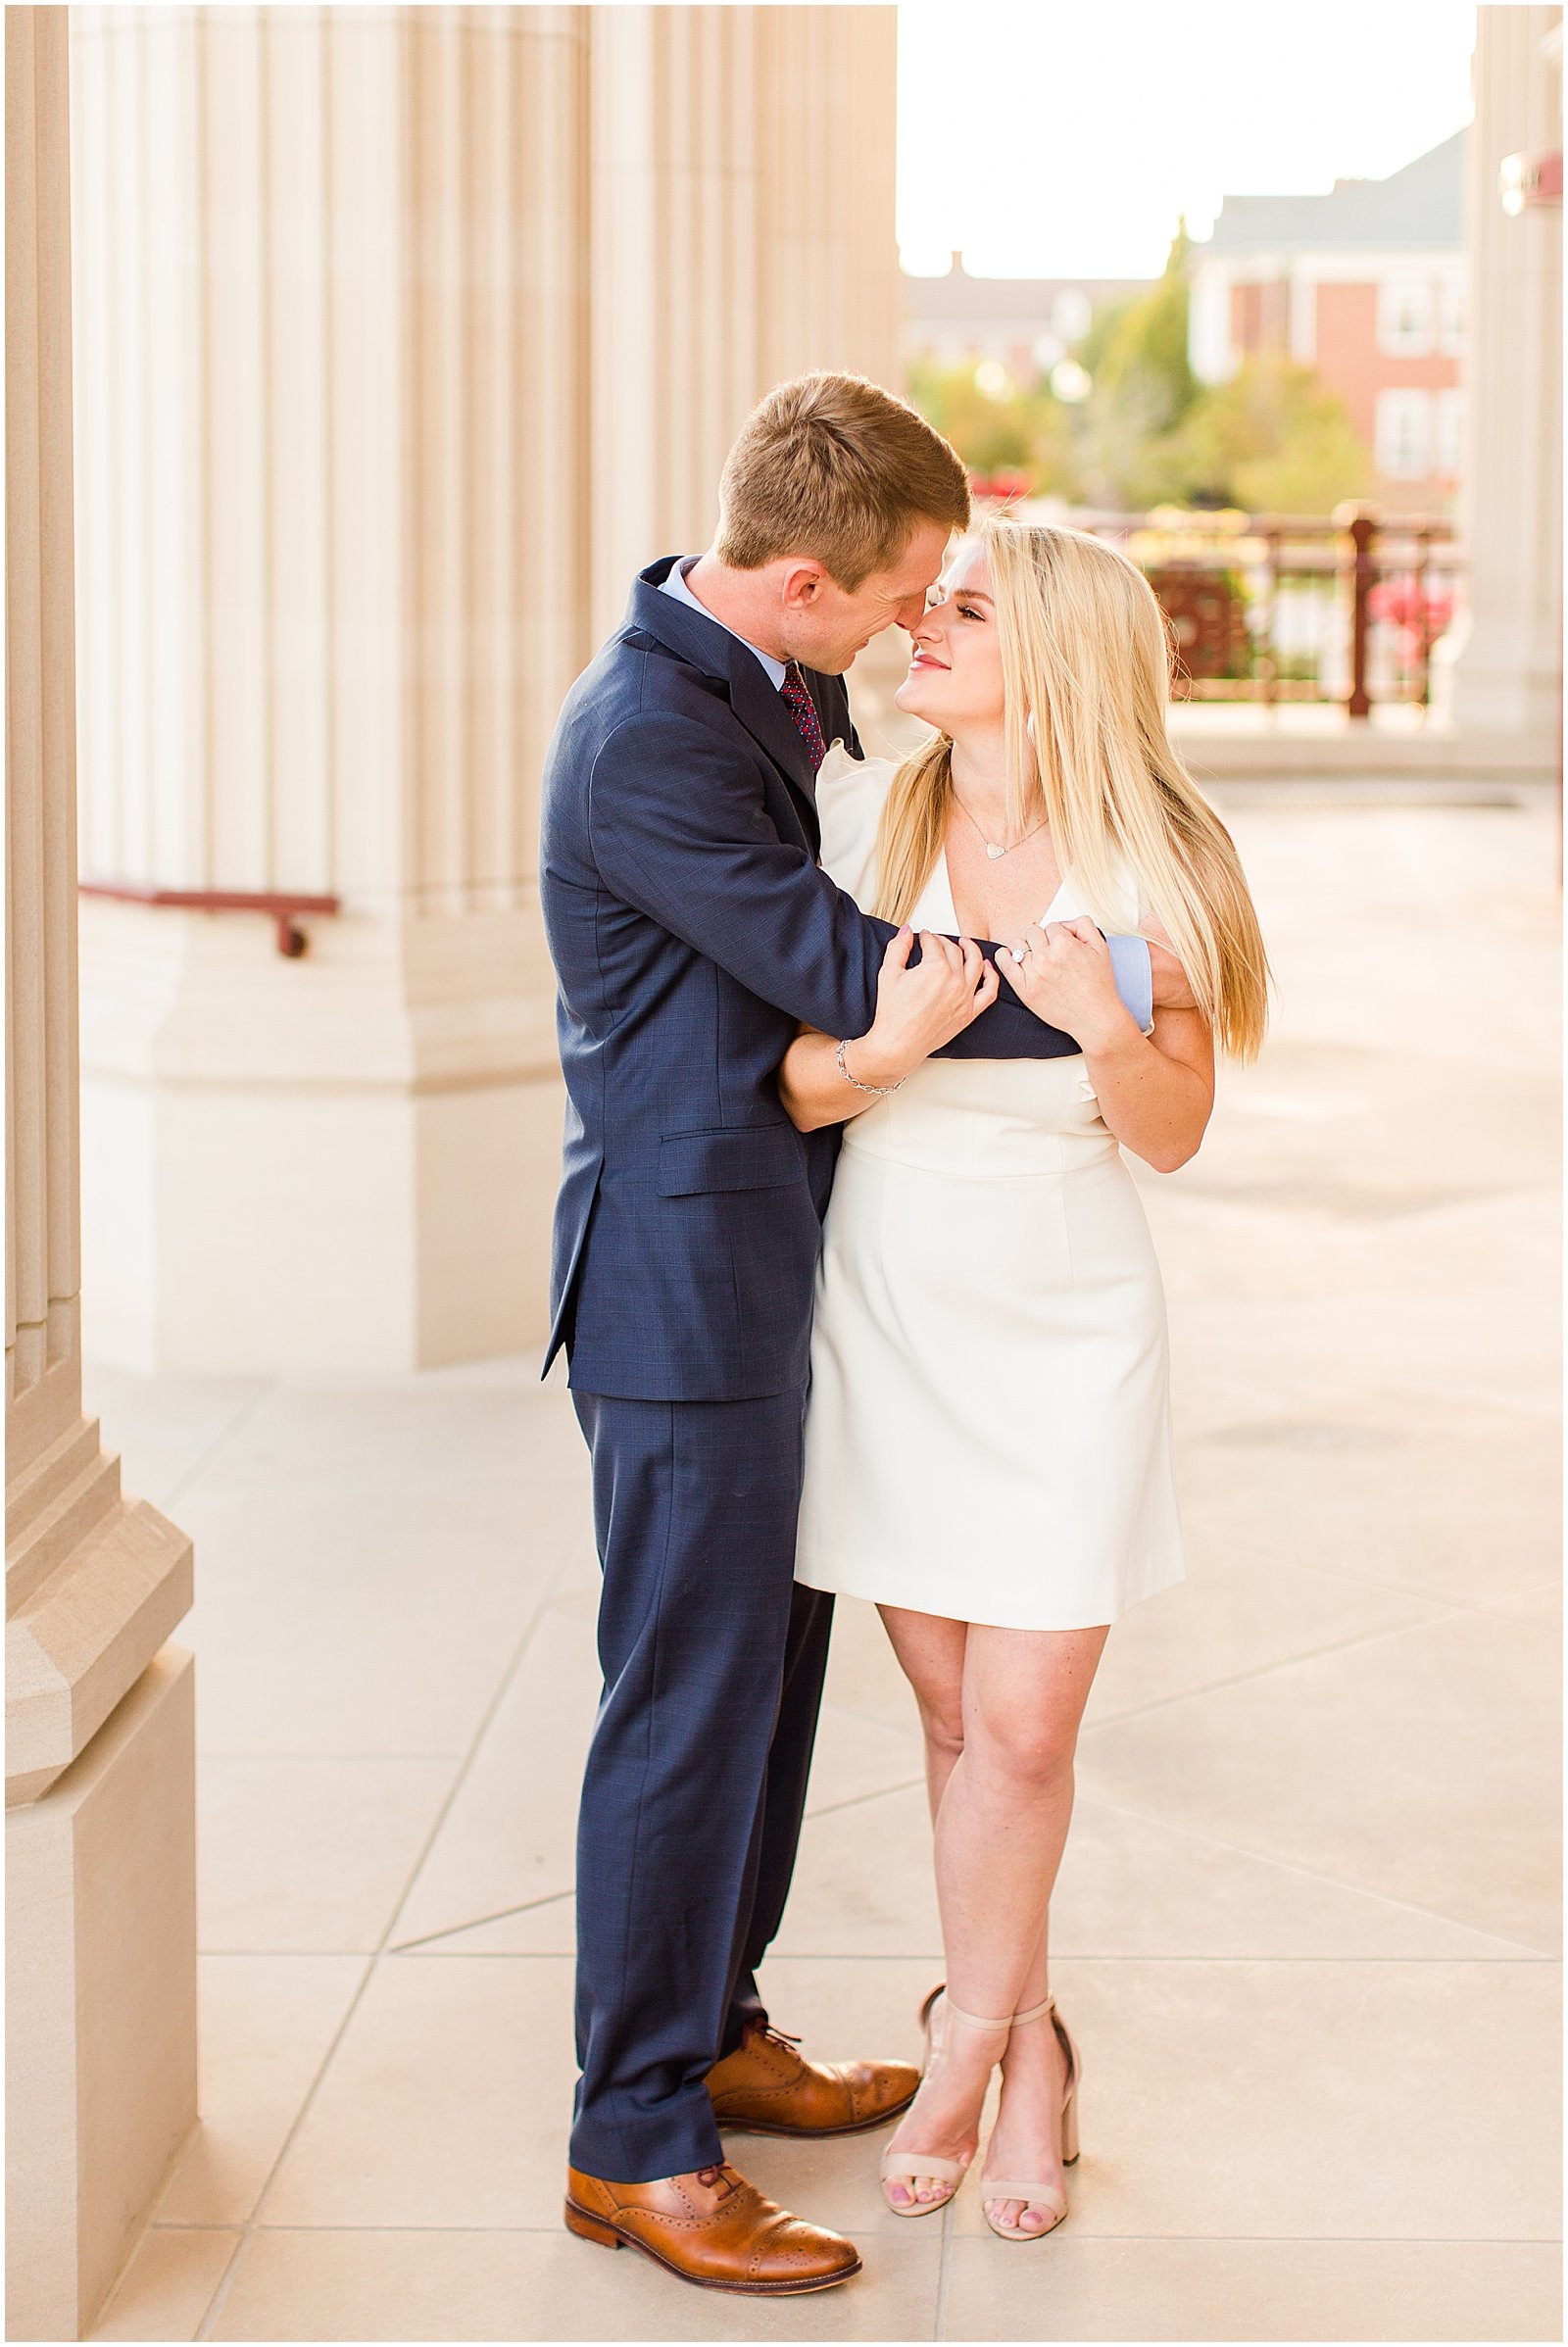 A Cute and Cuddly Engagement Session in Carmel, IN | Abbi and Josh0029.jpg